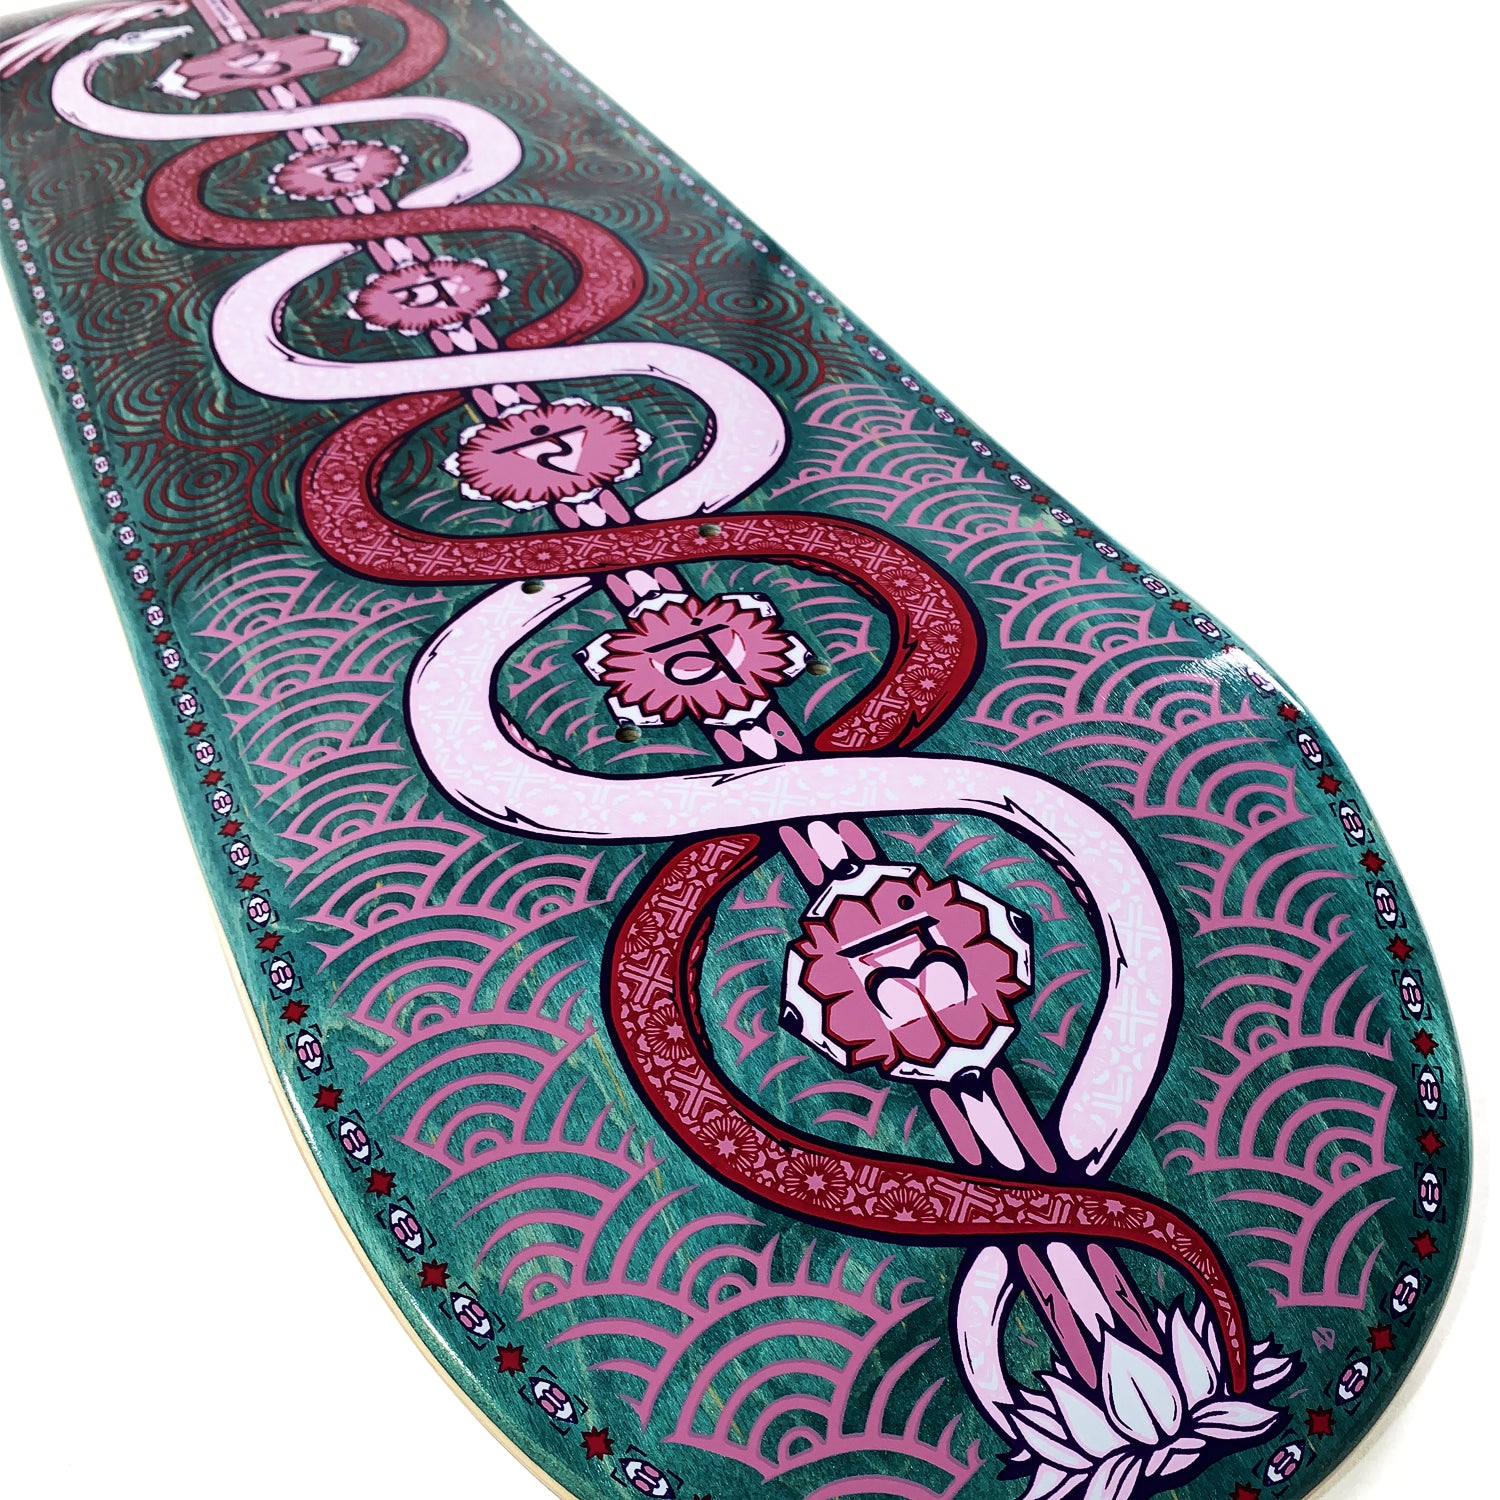 The Drawing Boards - 8.1" - Caduceus and the 7 Lotuses Deck - Prime Delux Store